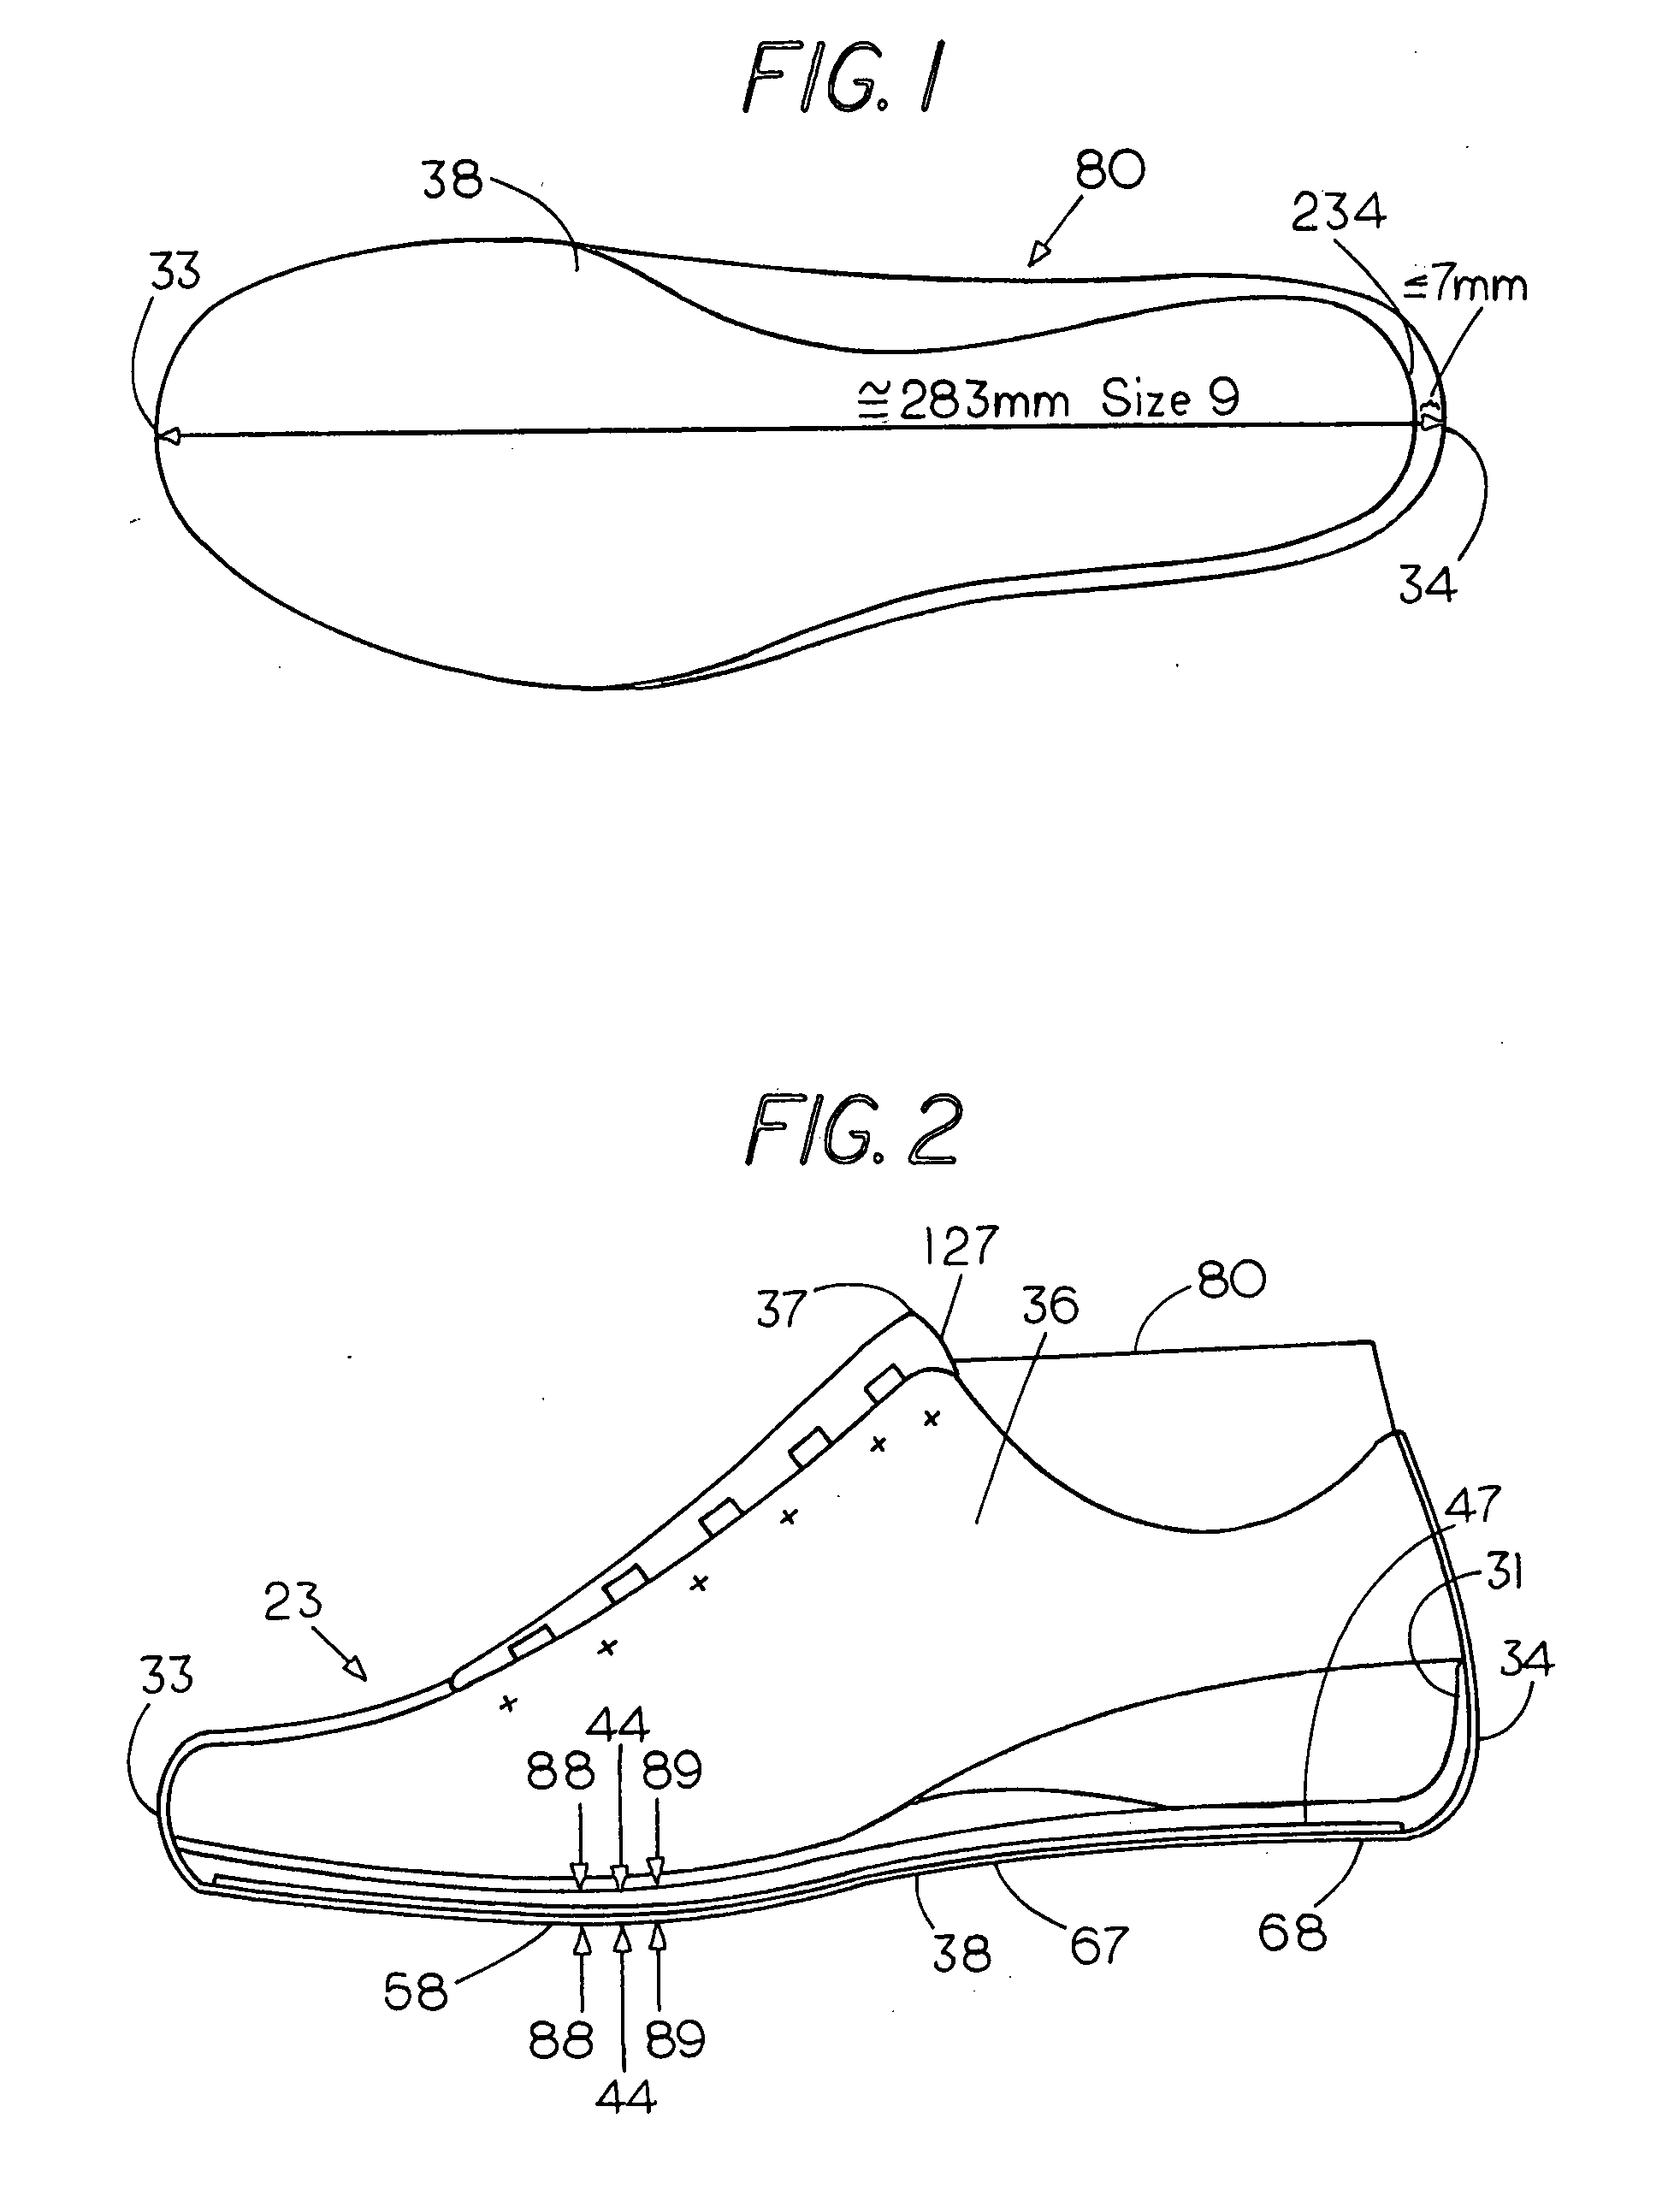 Custom article of footwear, method of making the same, and method of conducting retail and internet business